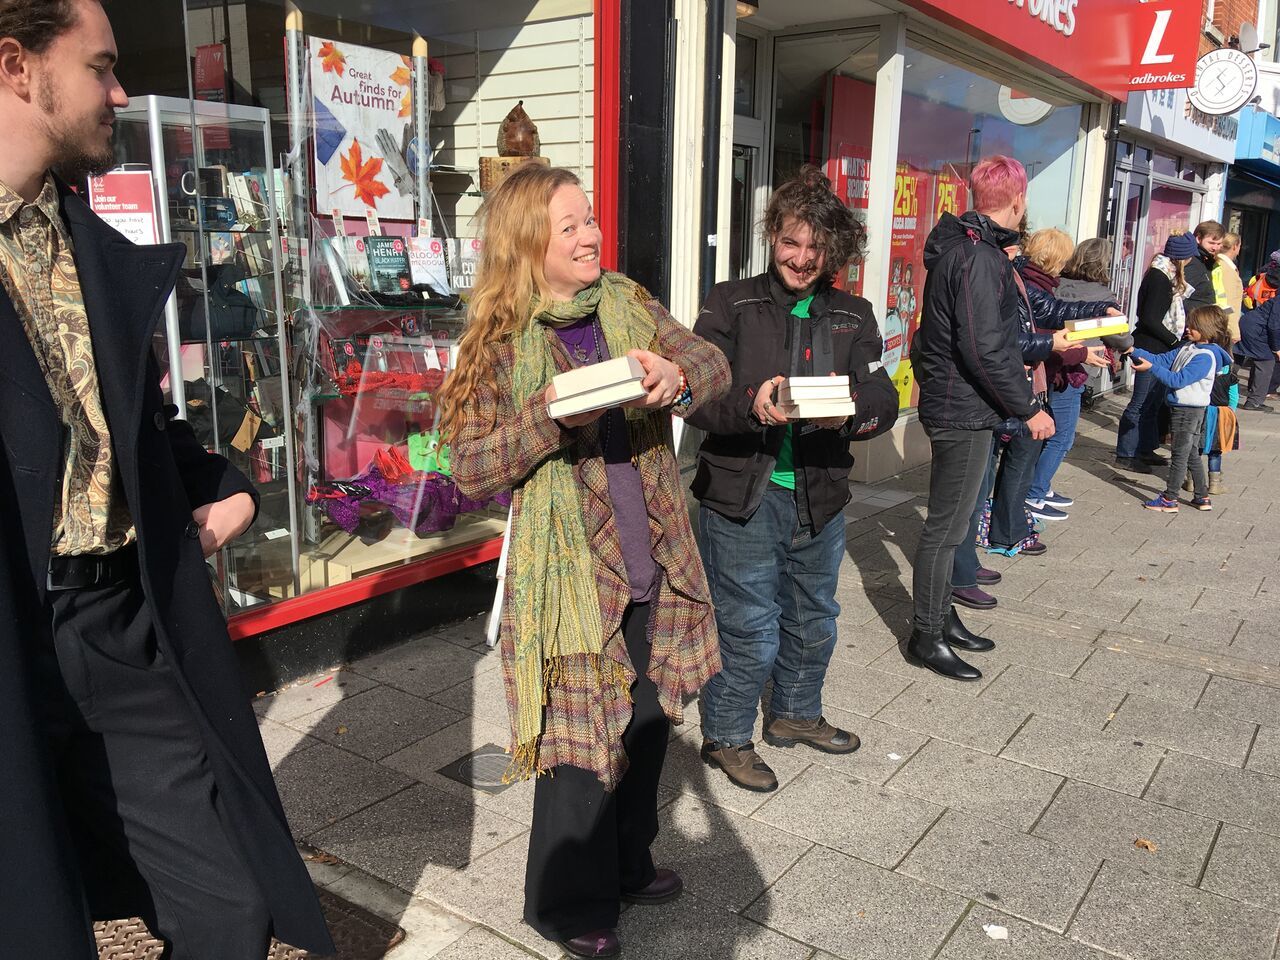 Human Chain along Portswood road to move October Books to new store- Credit October Books